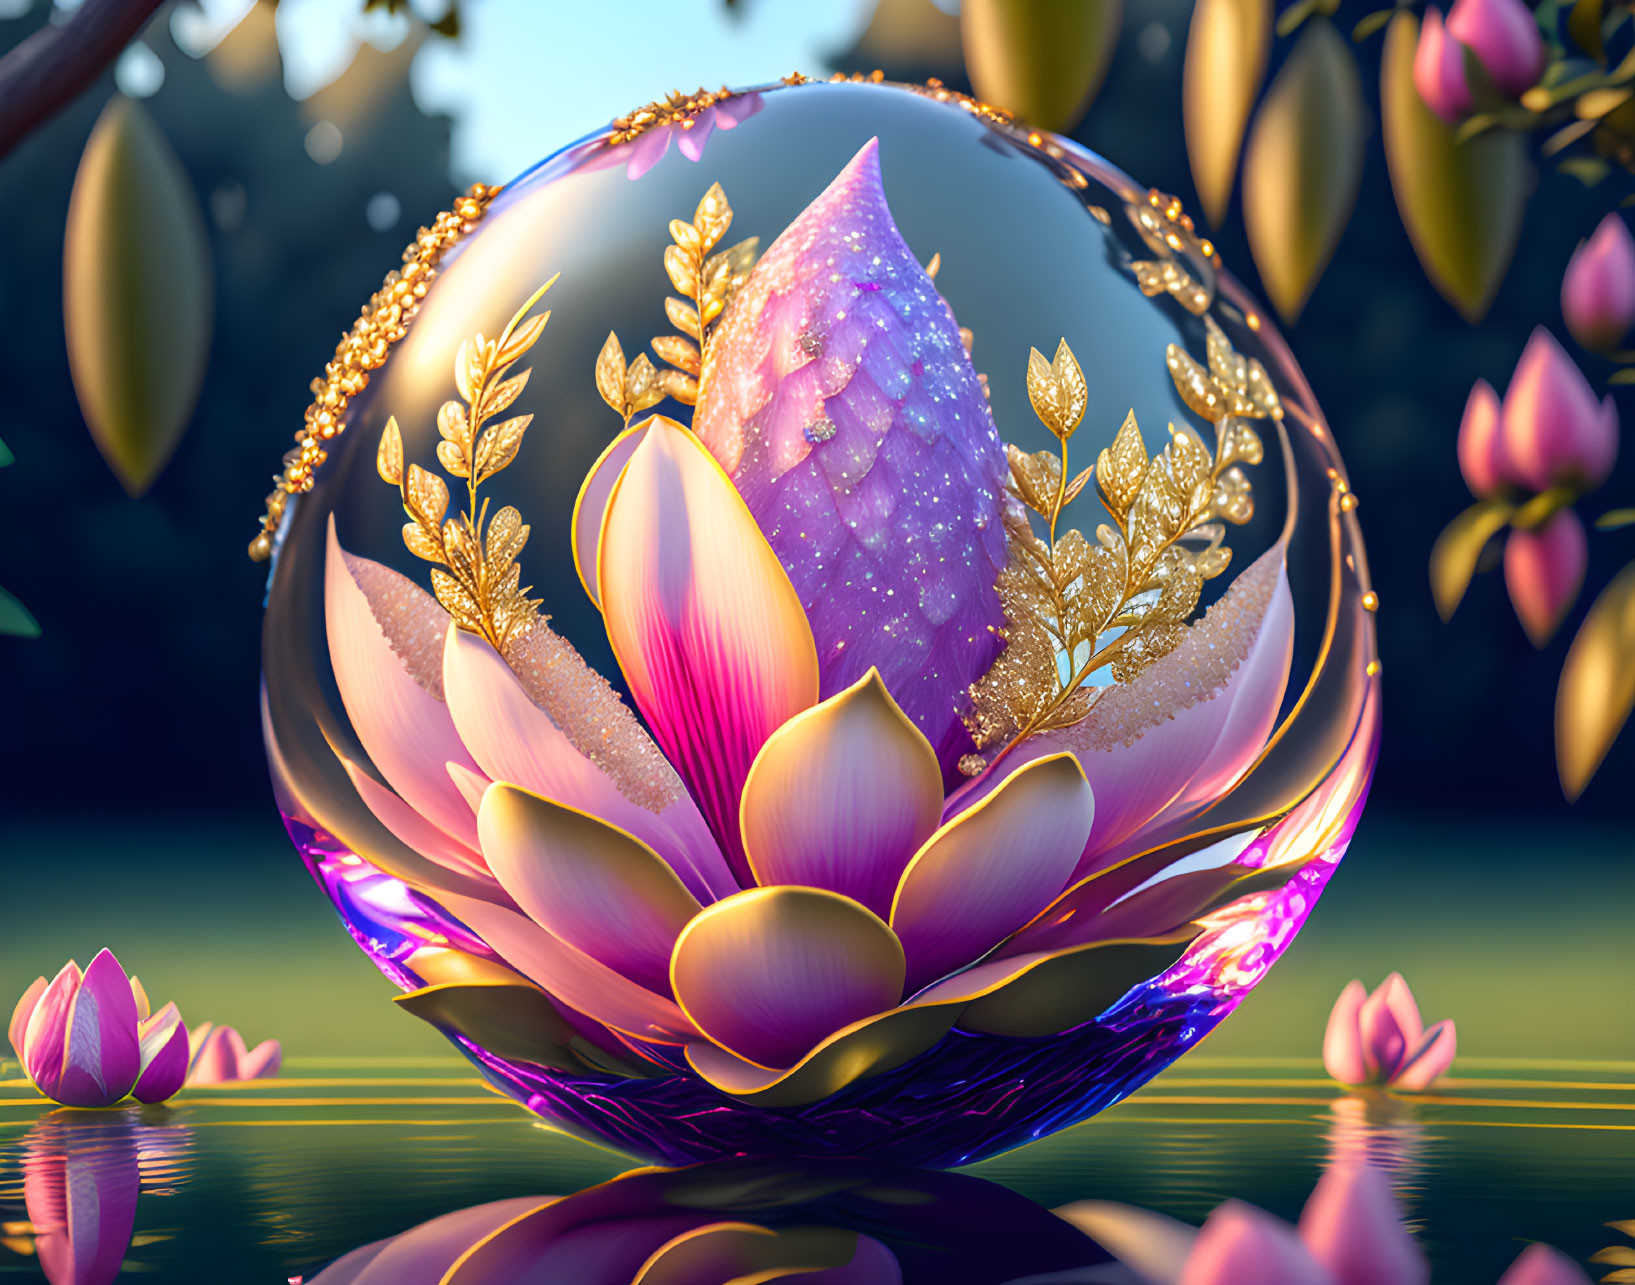 Vibrant purple lotus in transparent sphere with golden leaves on nature backdrop